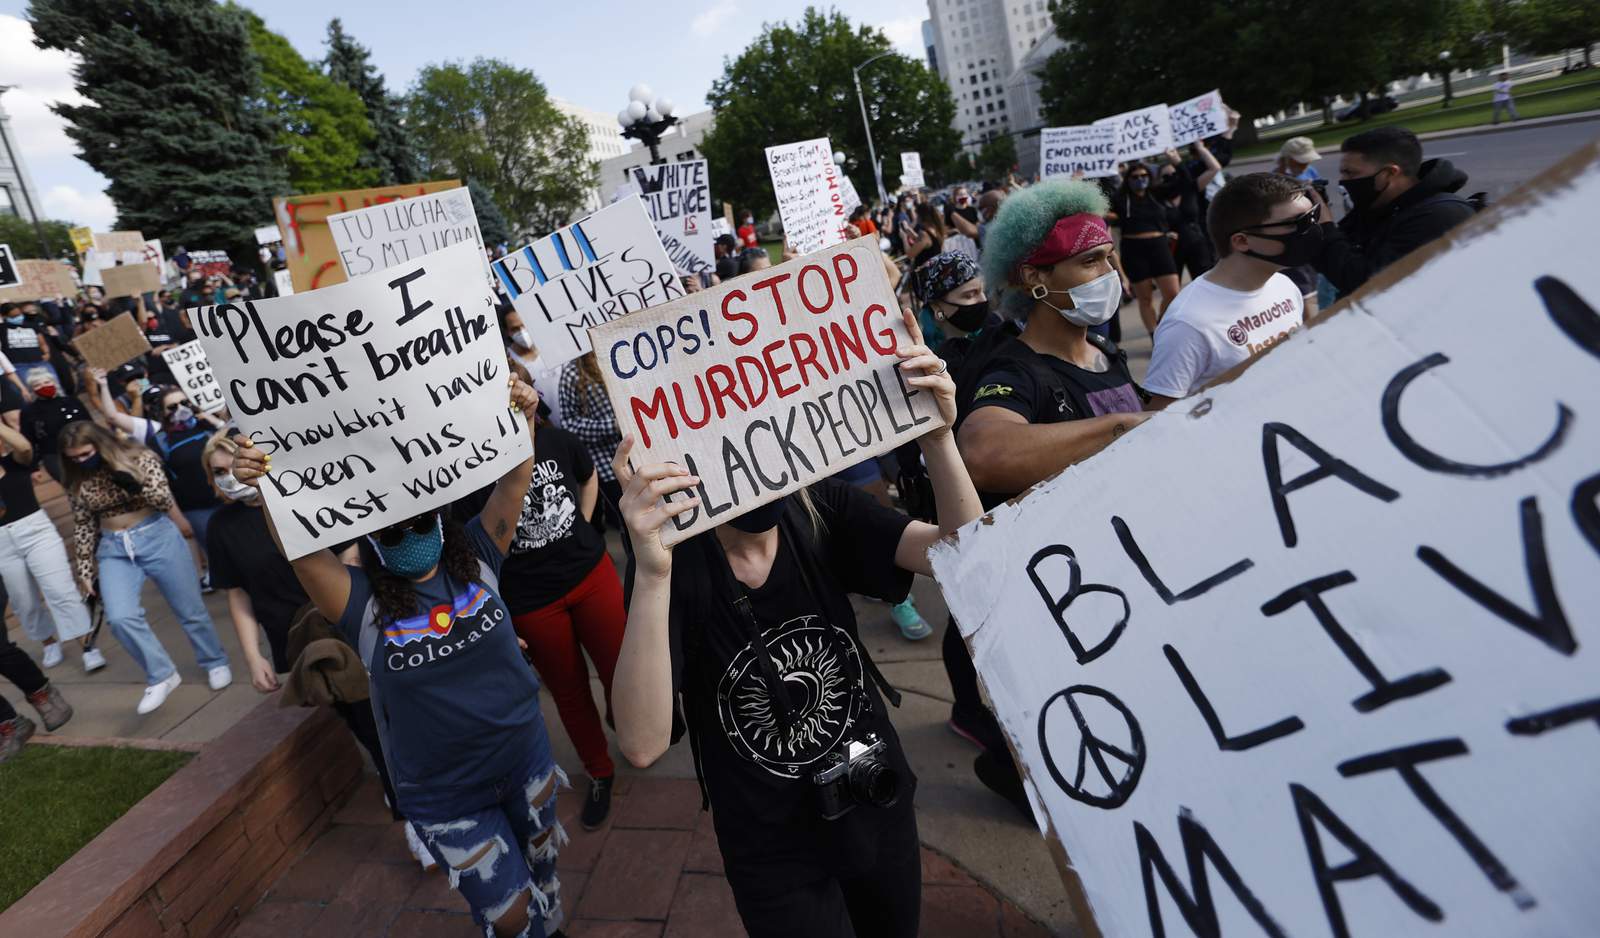 'March Against Police Brutality’ planned in Detroit today